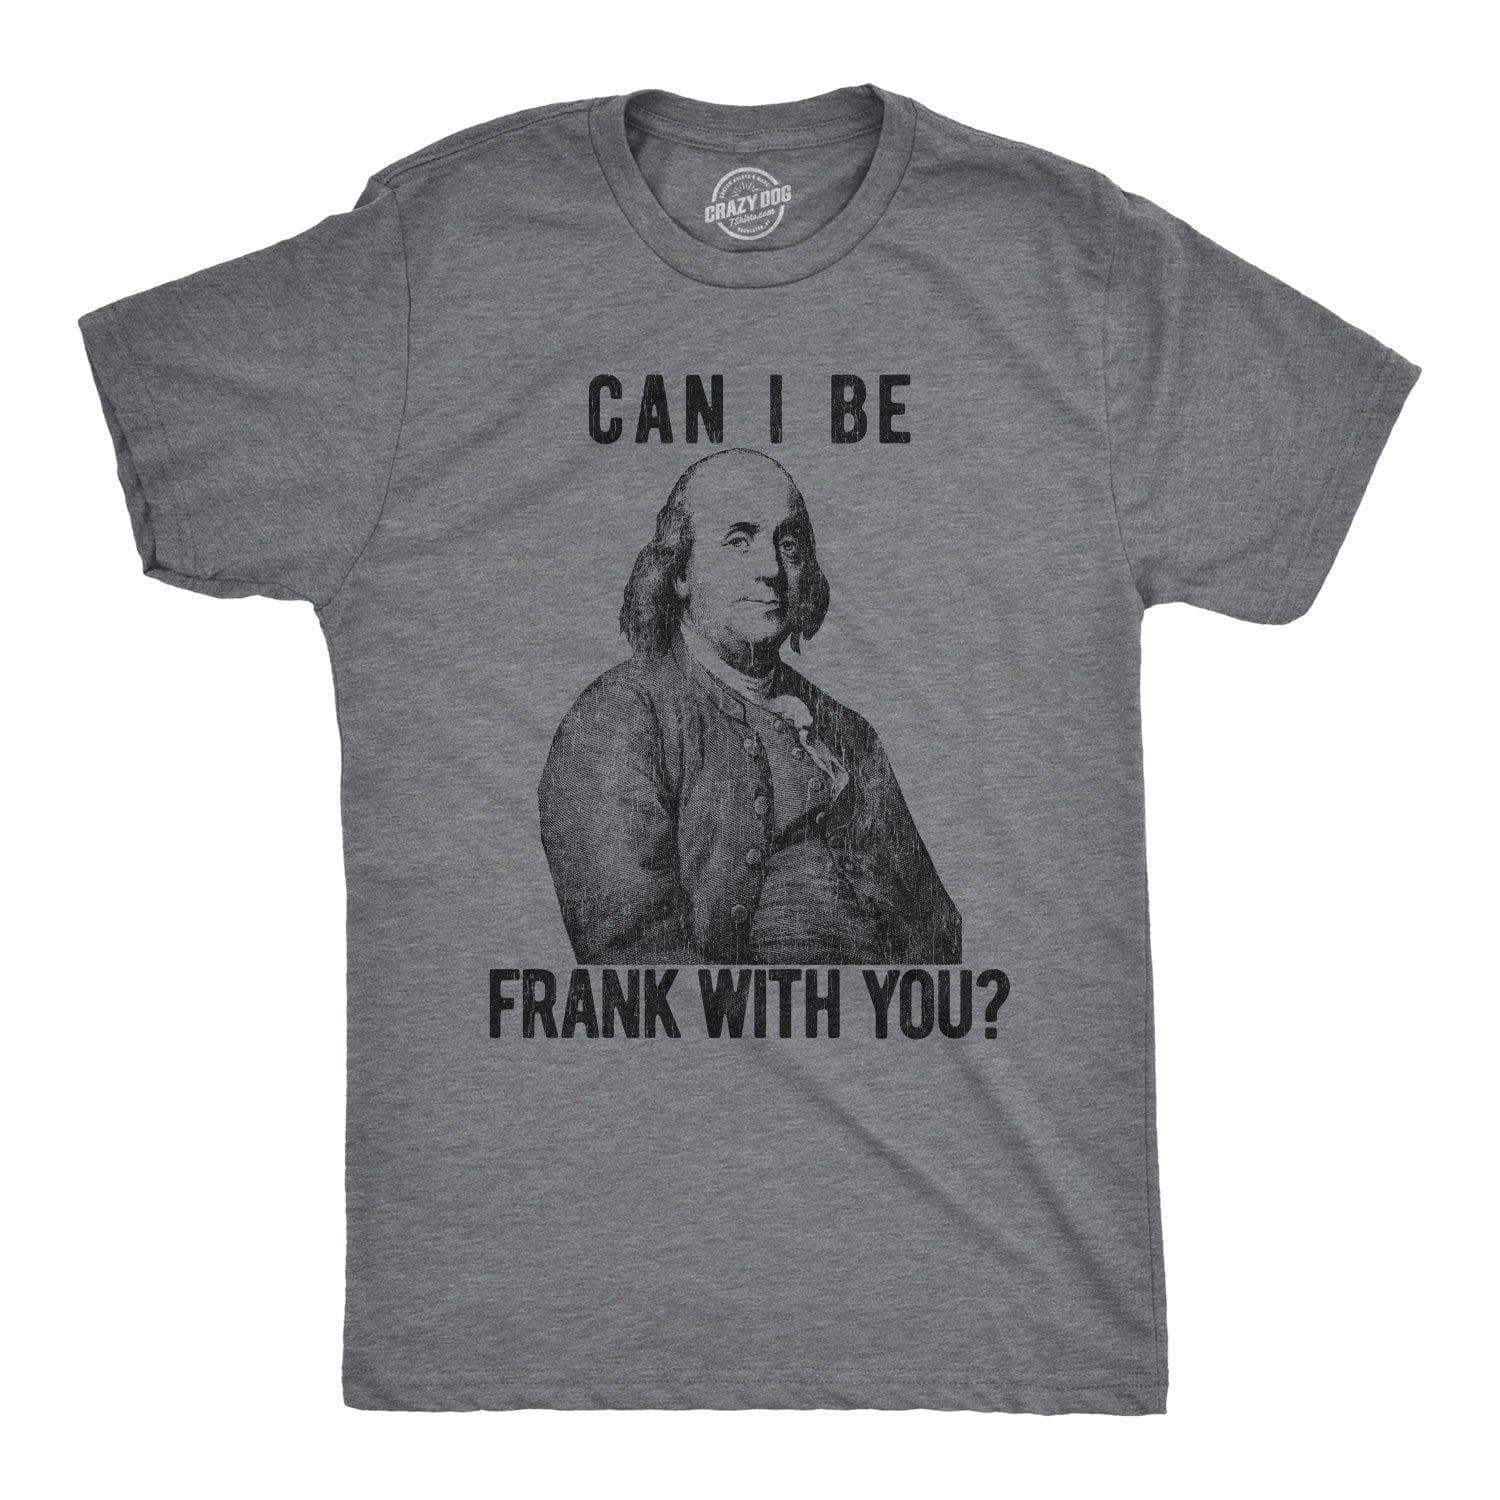 Can I Be Frank With You? Men's Tshirt  -  Crazy Dog T-Shirts